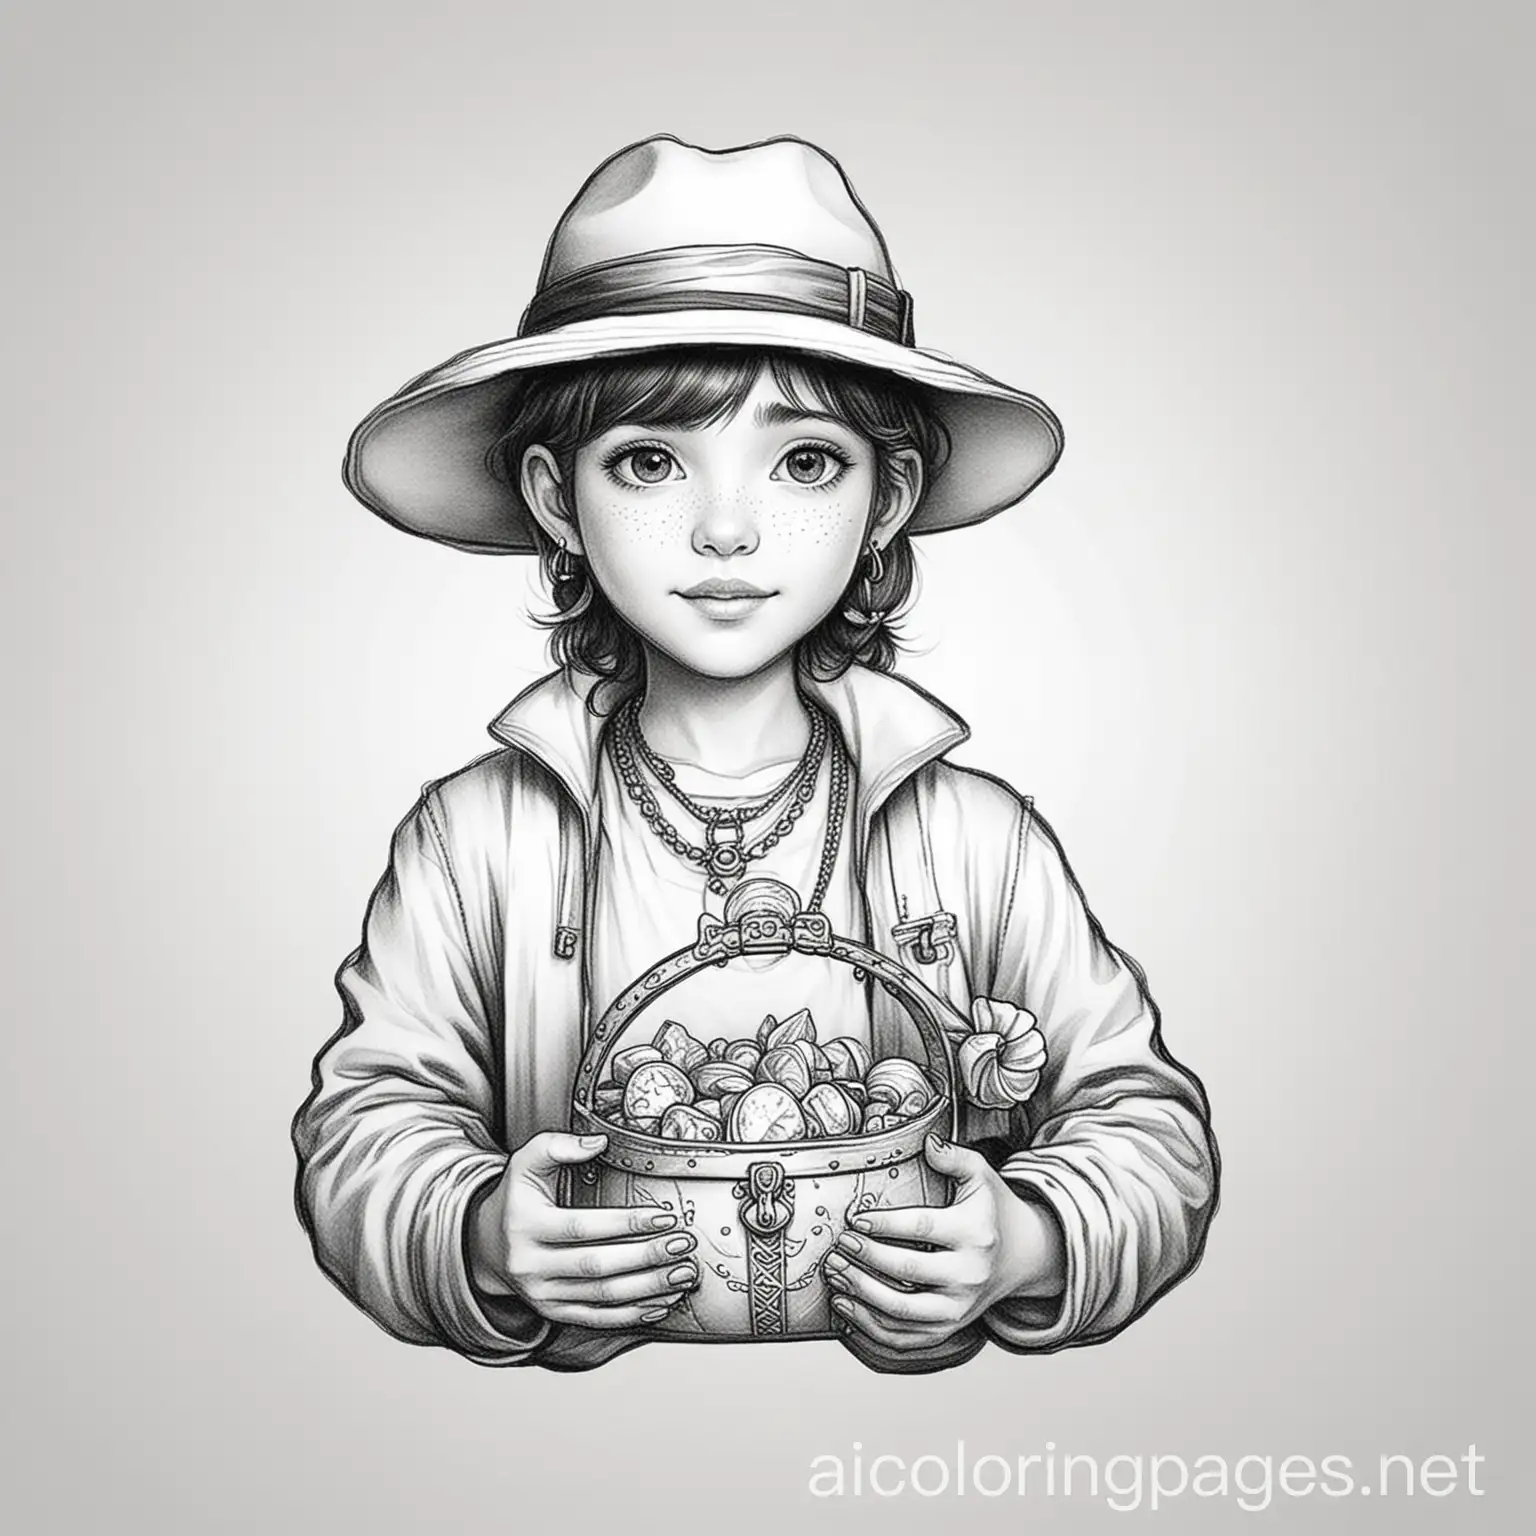 Treasure person with a hat holding treasure, Coloring Page, black and white, line art, white background, Simplicity, Ample White Space